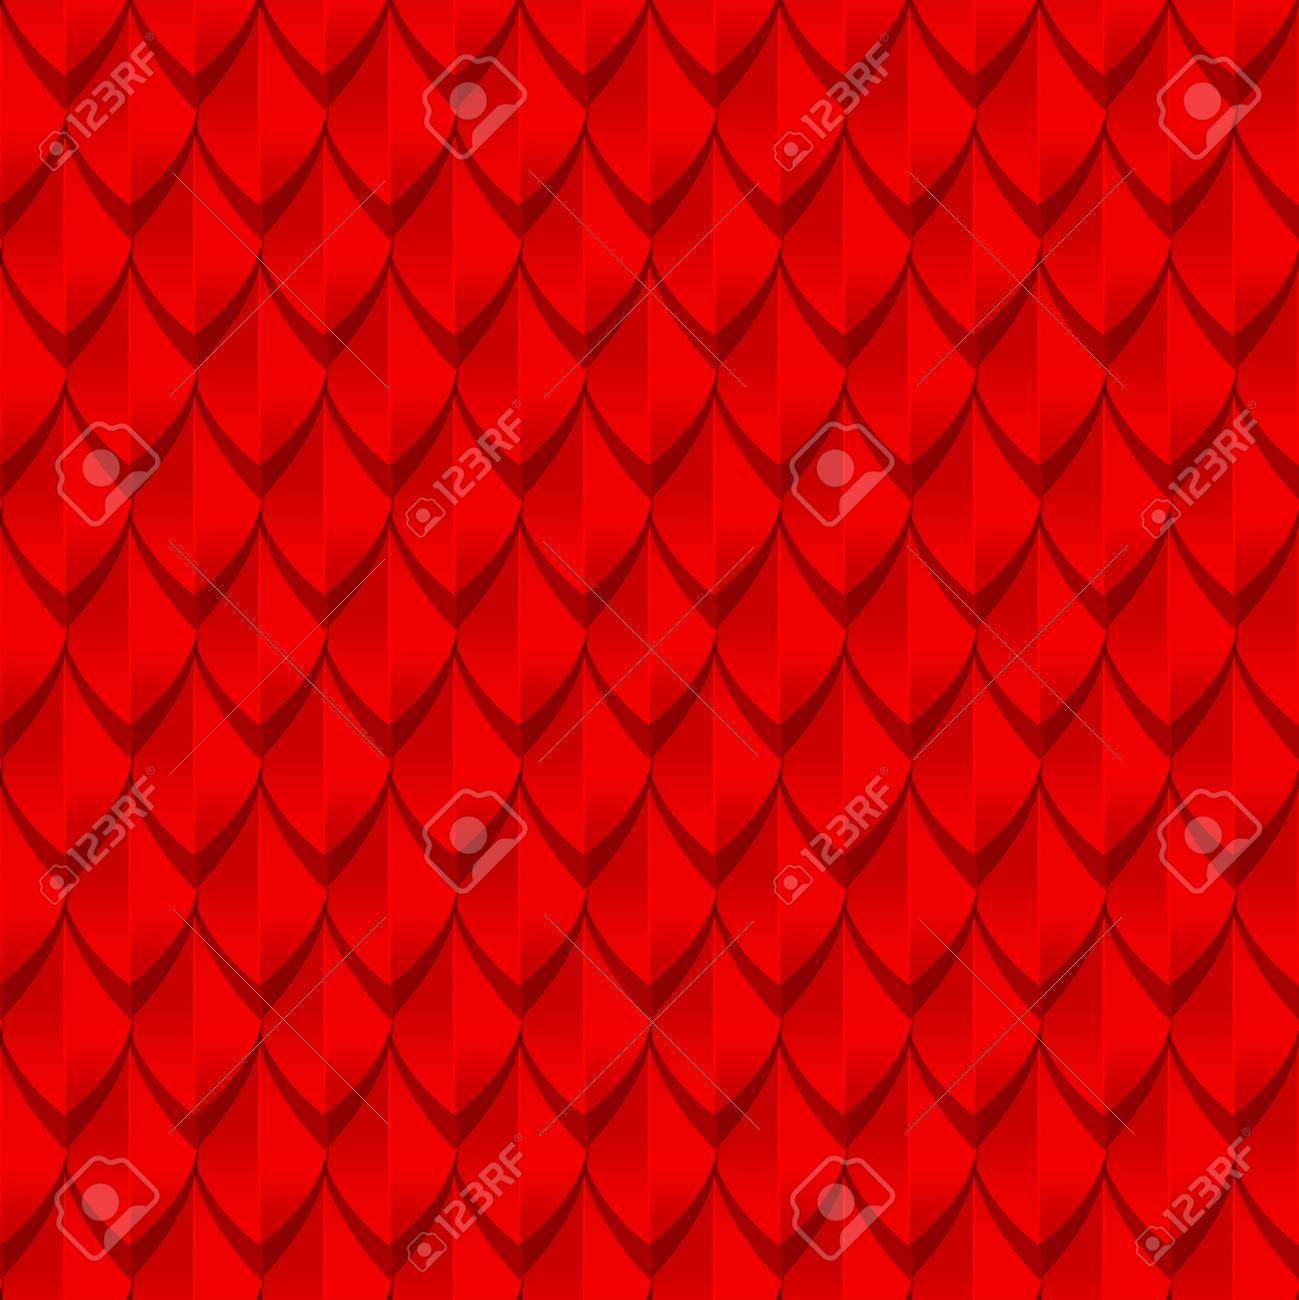 Free download Red Dragon Scales Seamless Background Texture Vector  Illustration [1299x1300] for your Desktop, Mobile & Tablet | Explore 44+  Scale Background | Mermaid Scale Wallpaper, Large Scale Wallpaper, Large  Scale Floral Wallpaper